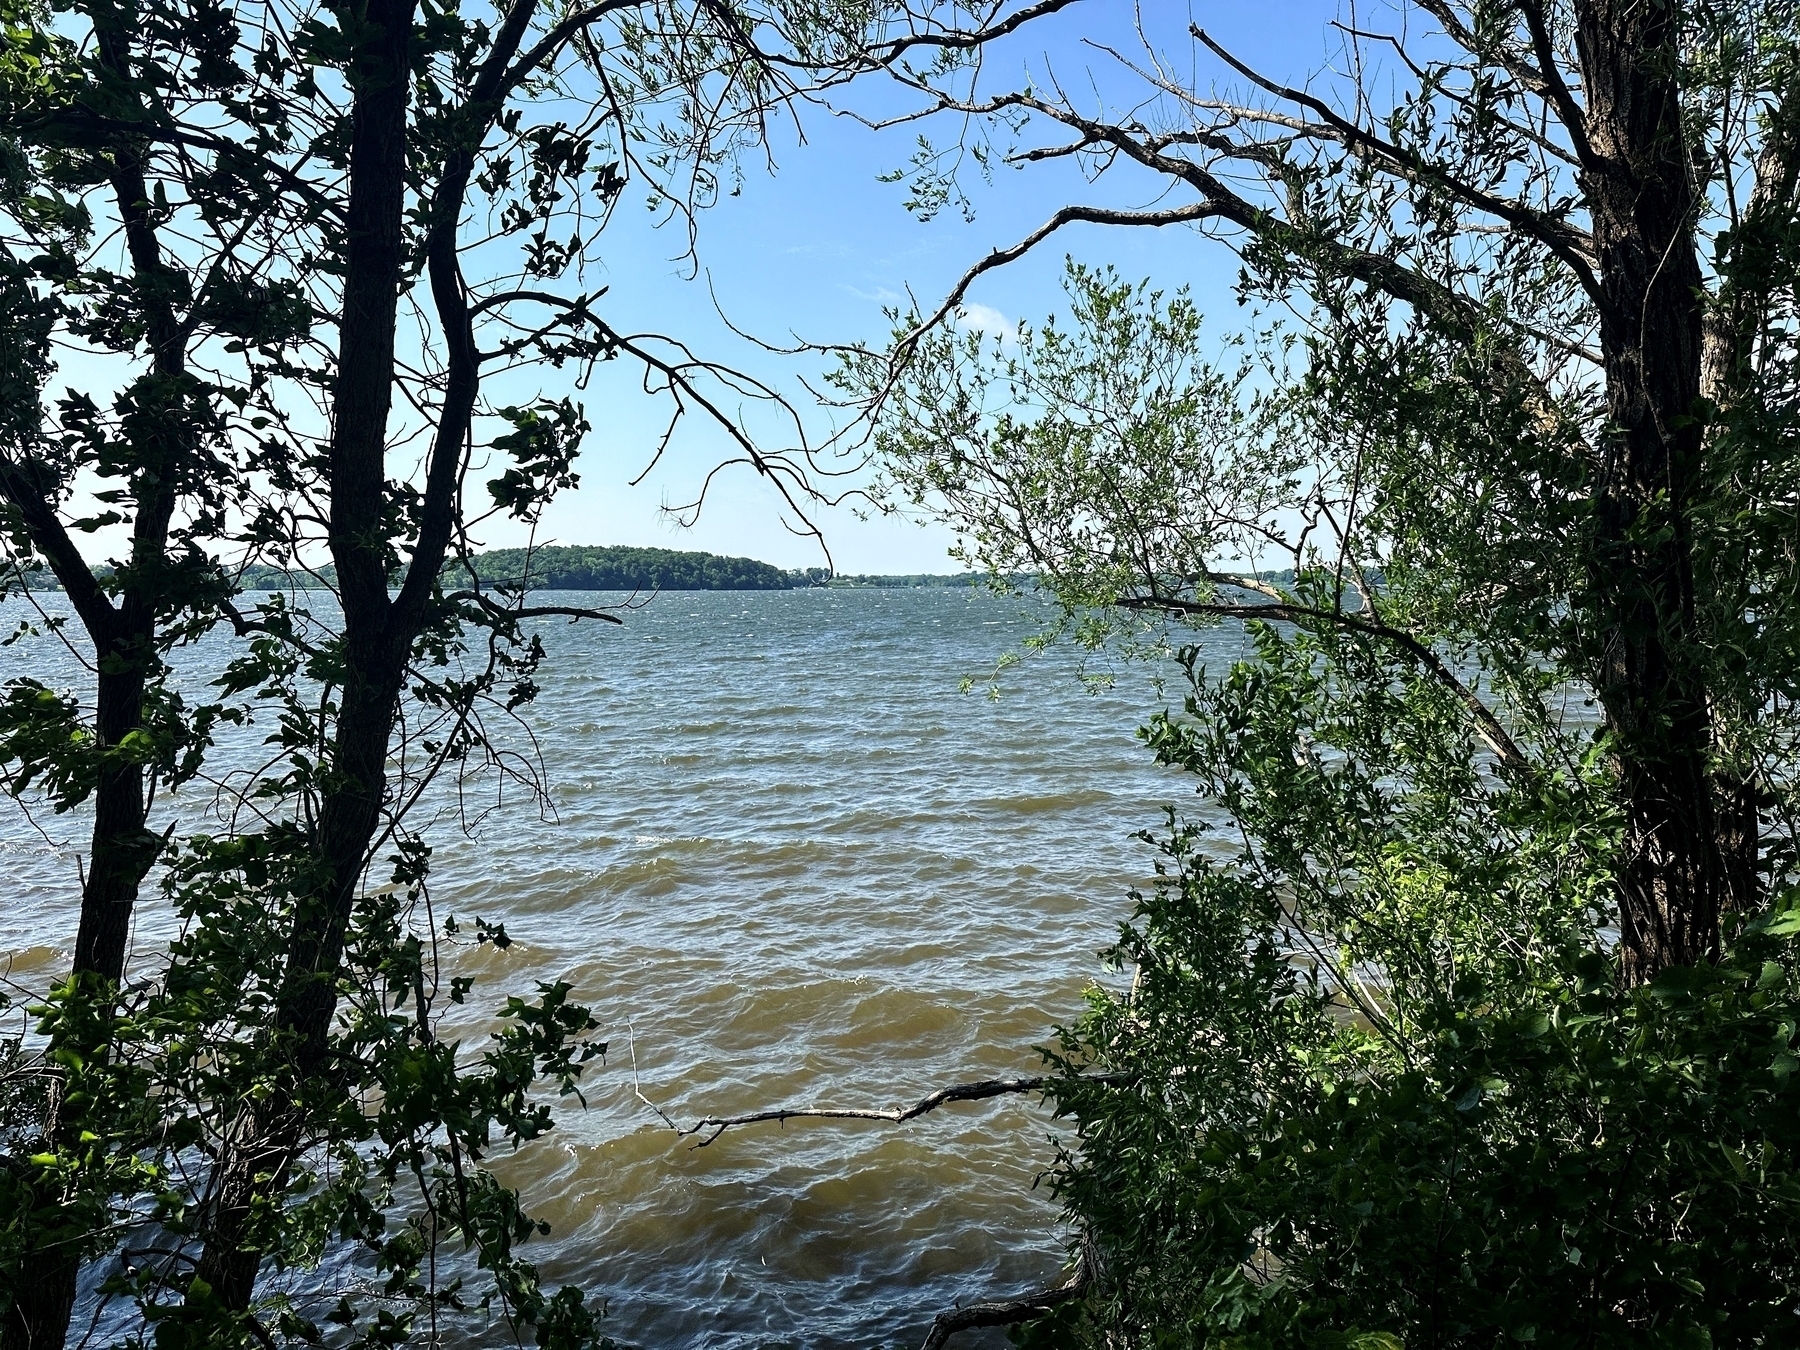 Waves ripple on a large lake framed by trees and leafy branches in the foreground with a wooded shoreline visible in the distance under a sunny blue sky.